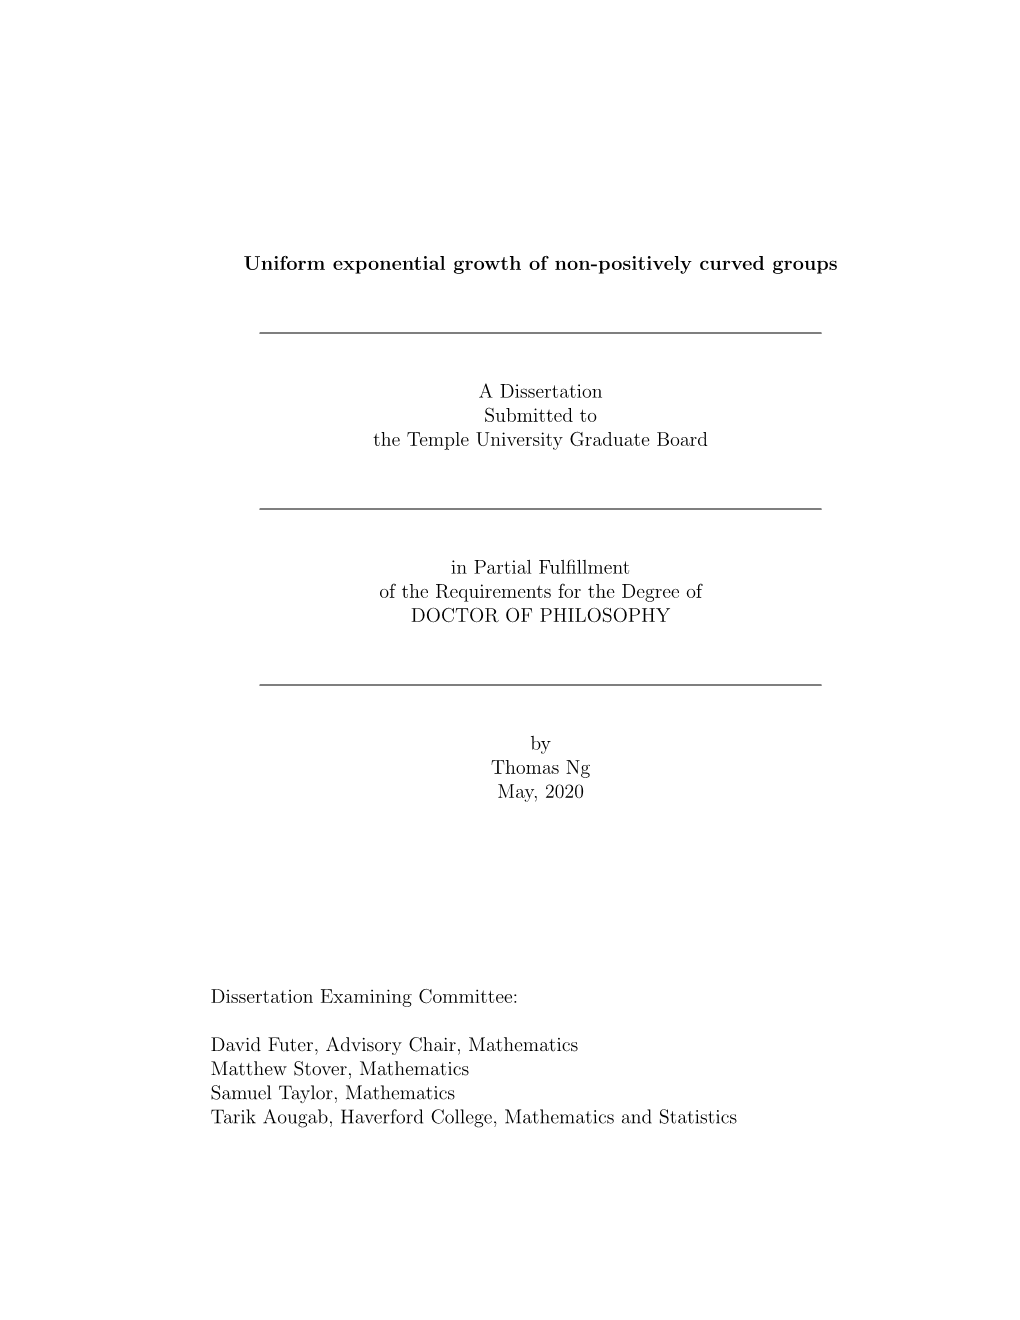 Uniform Exponential Growth of Non-Positively Curved Groups